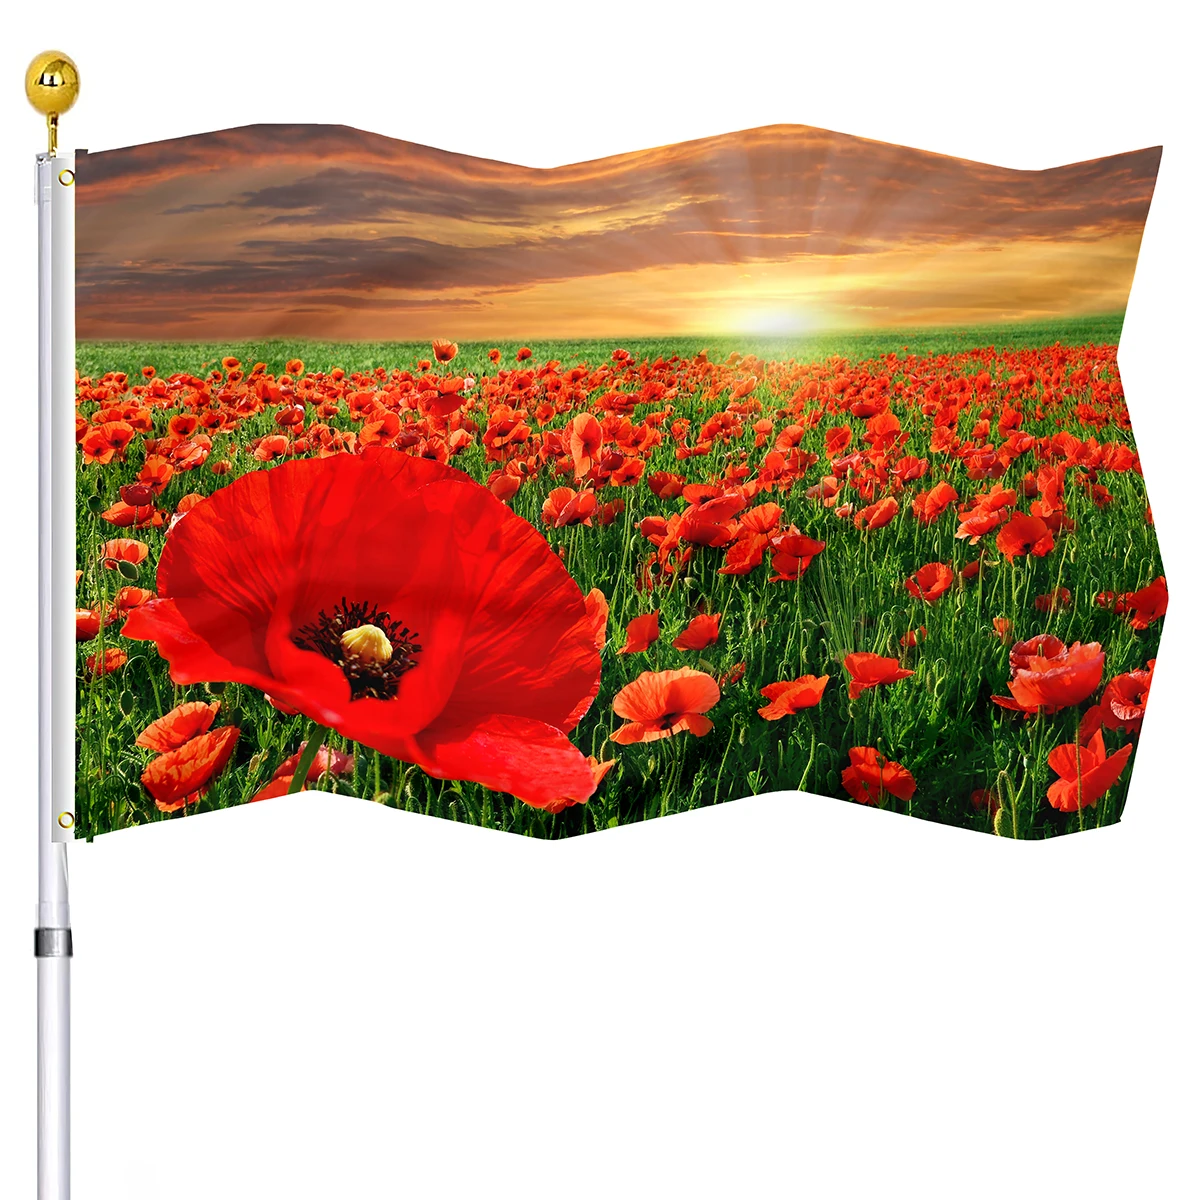 

Poppies Flag Field Sunset Nature Landscape Flags Banners with Brass Grommets Double Stitched Flag for House Inside Outdoor Decor